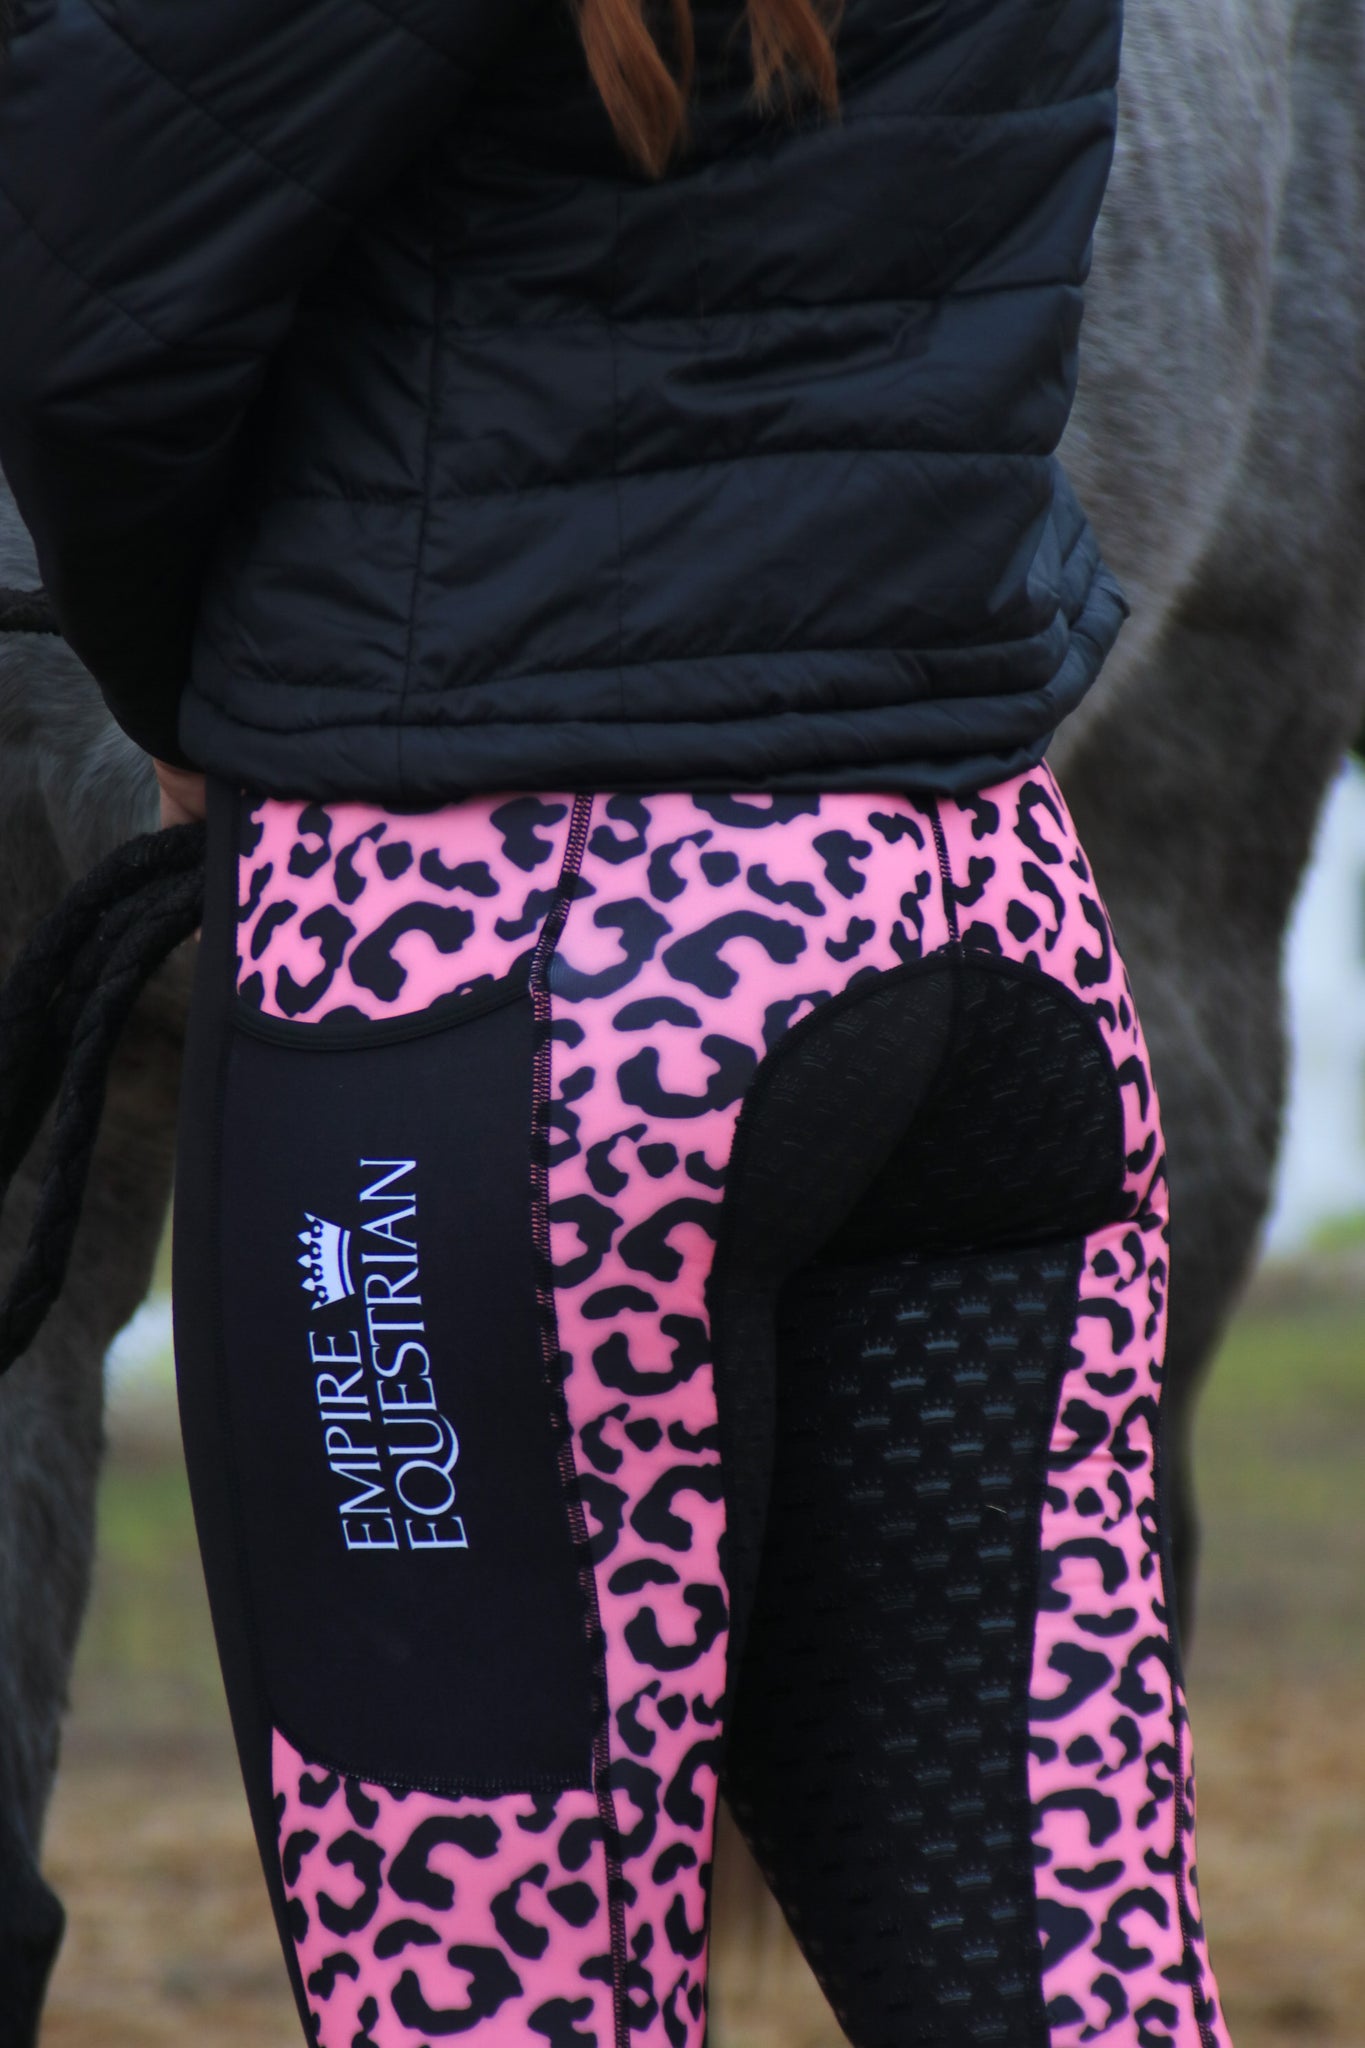 Unlined Riding Tights - CARE BEARS – Empire Equestrian